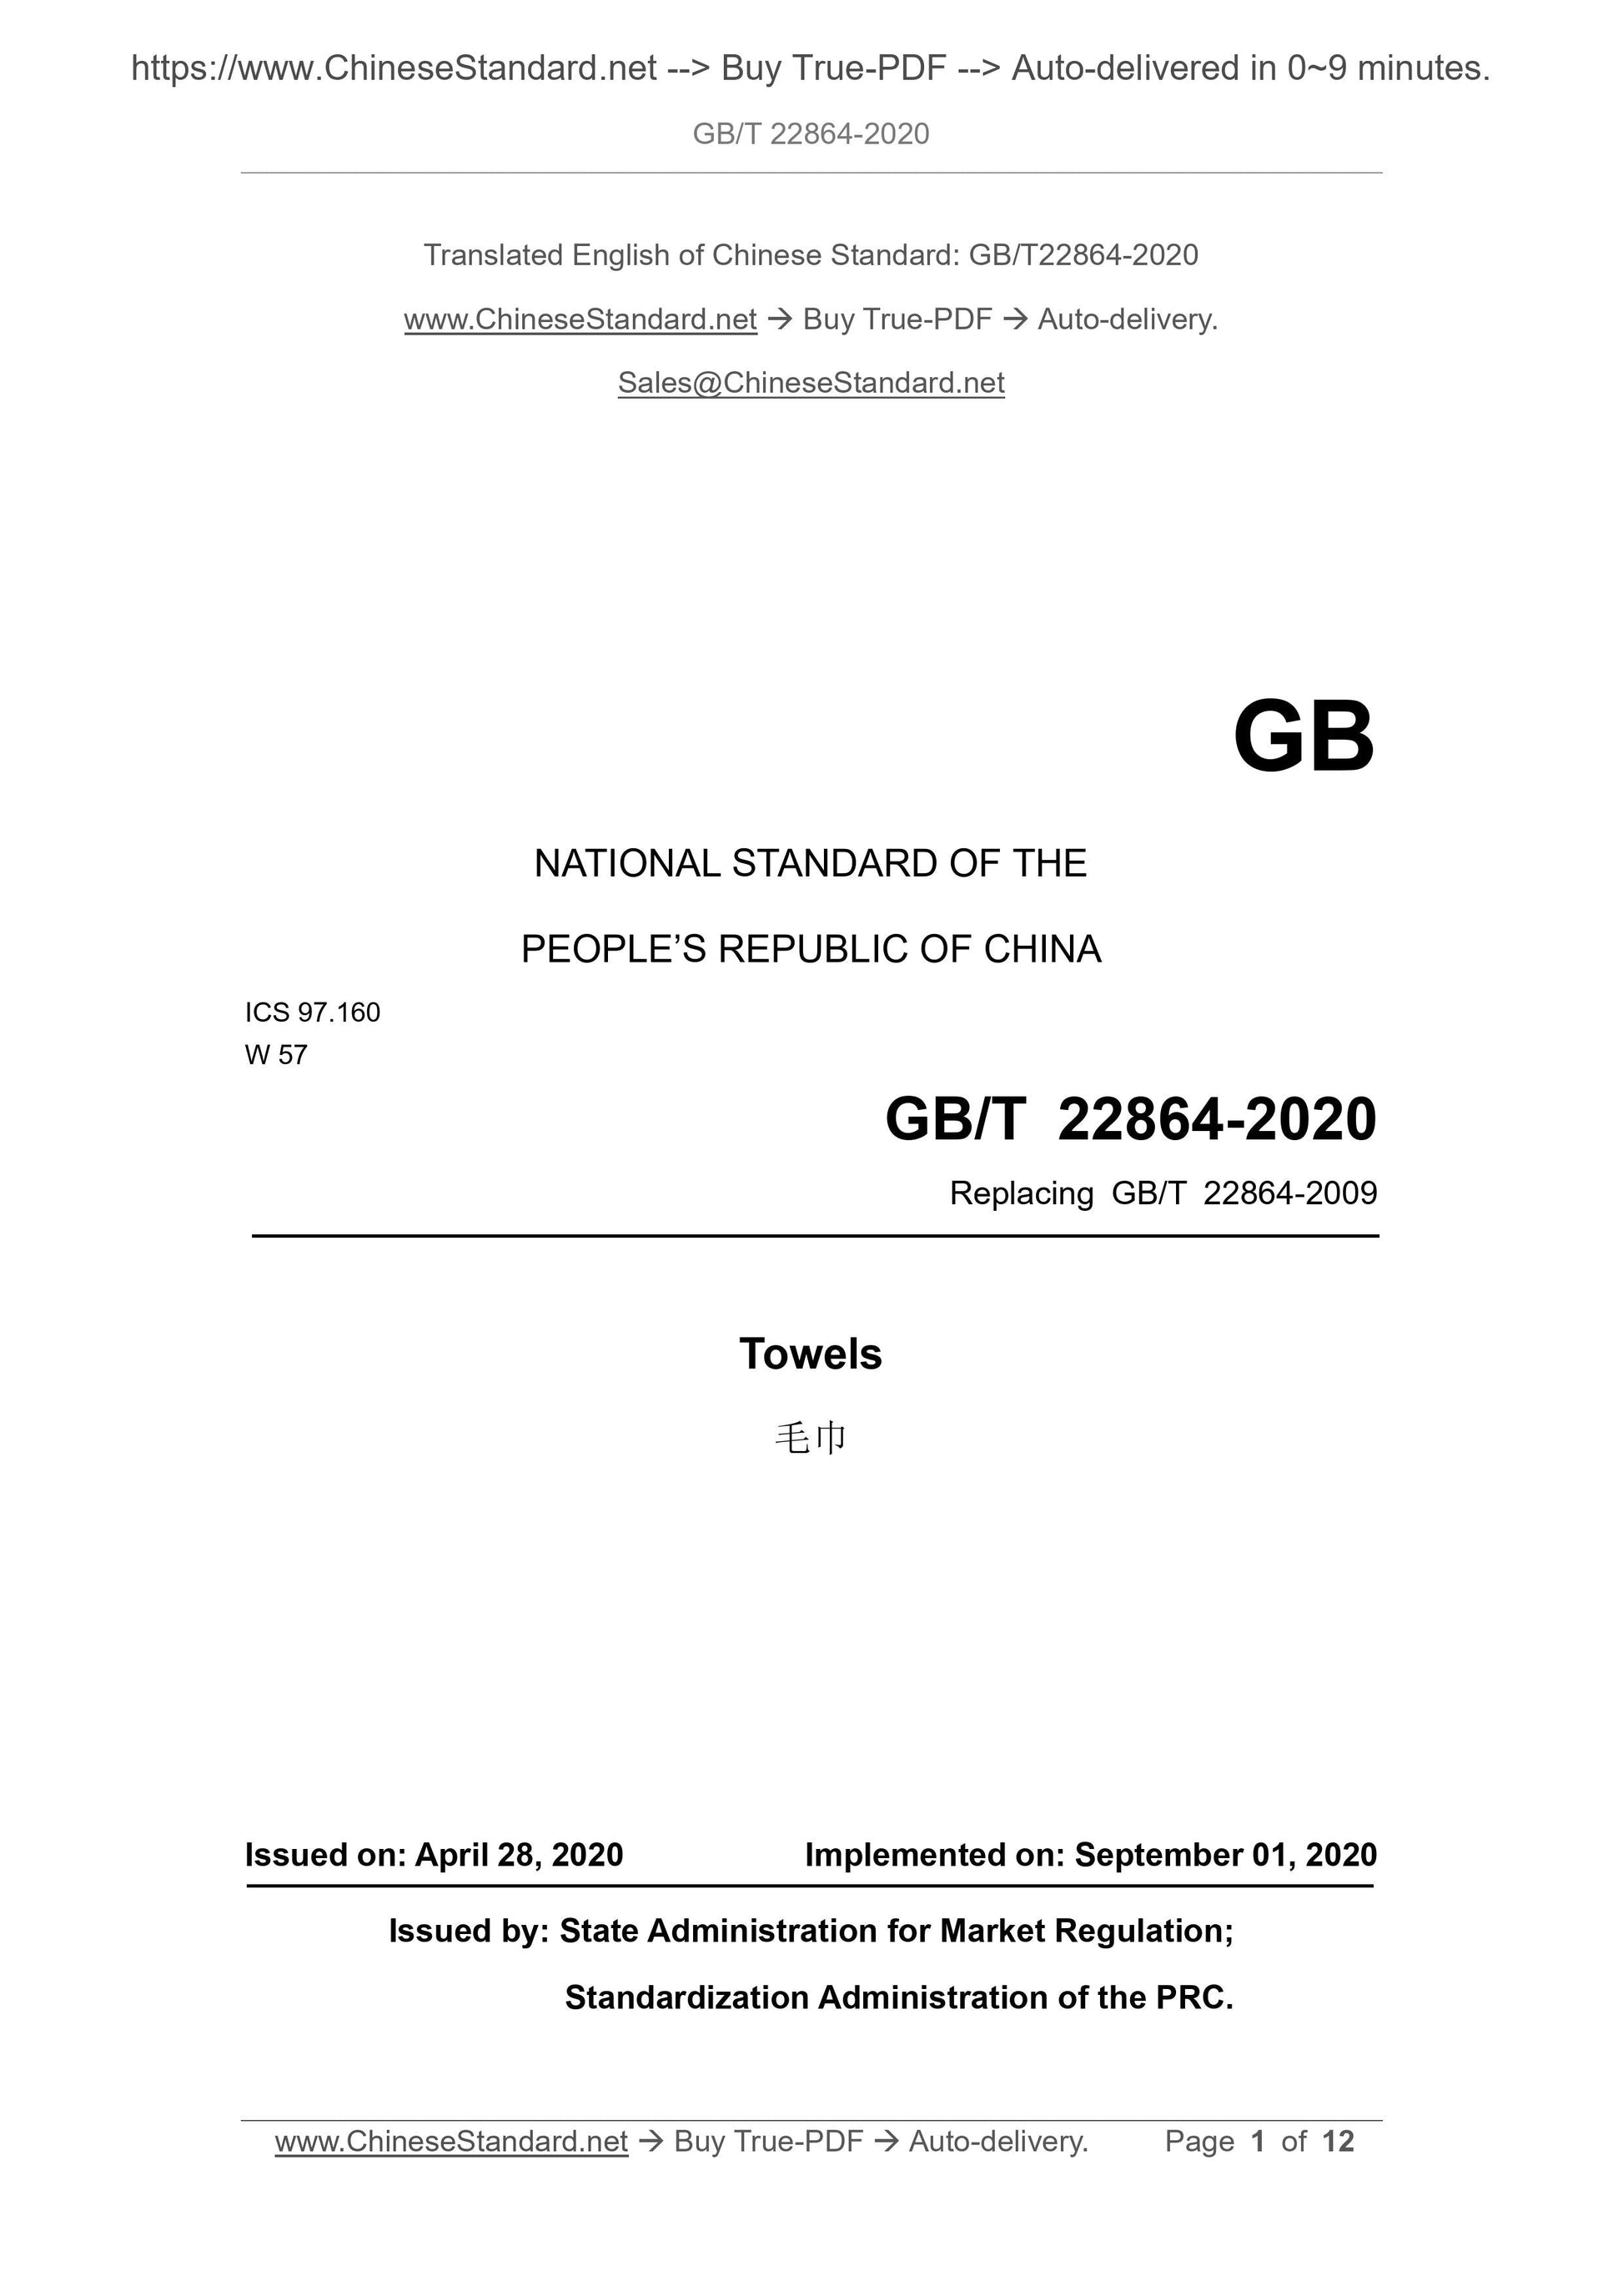 GB/T 22864-2020 Page 1